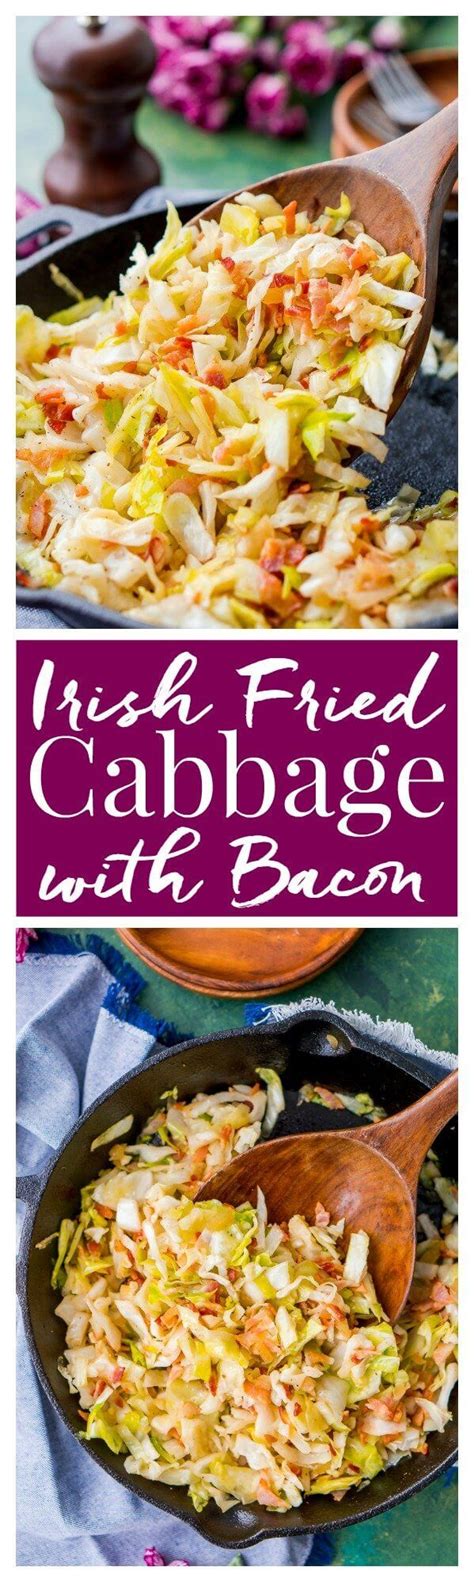 Irish Fried Cabbage and Bacon is a simple recipe that's pan-fried in bacon grease and loaded up ...